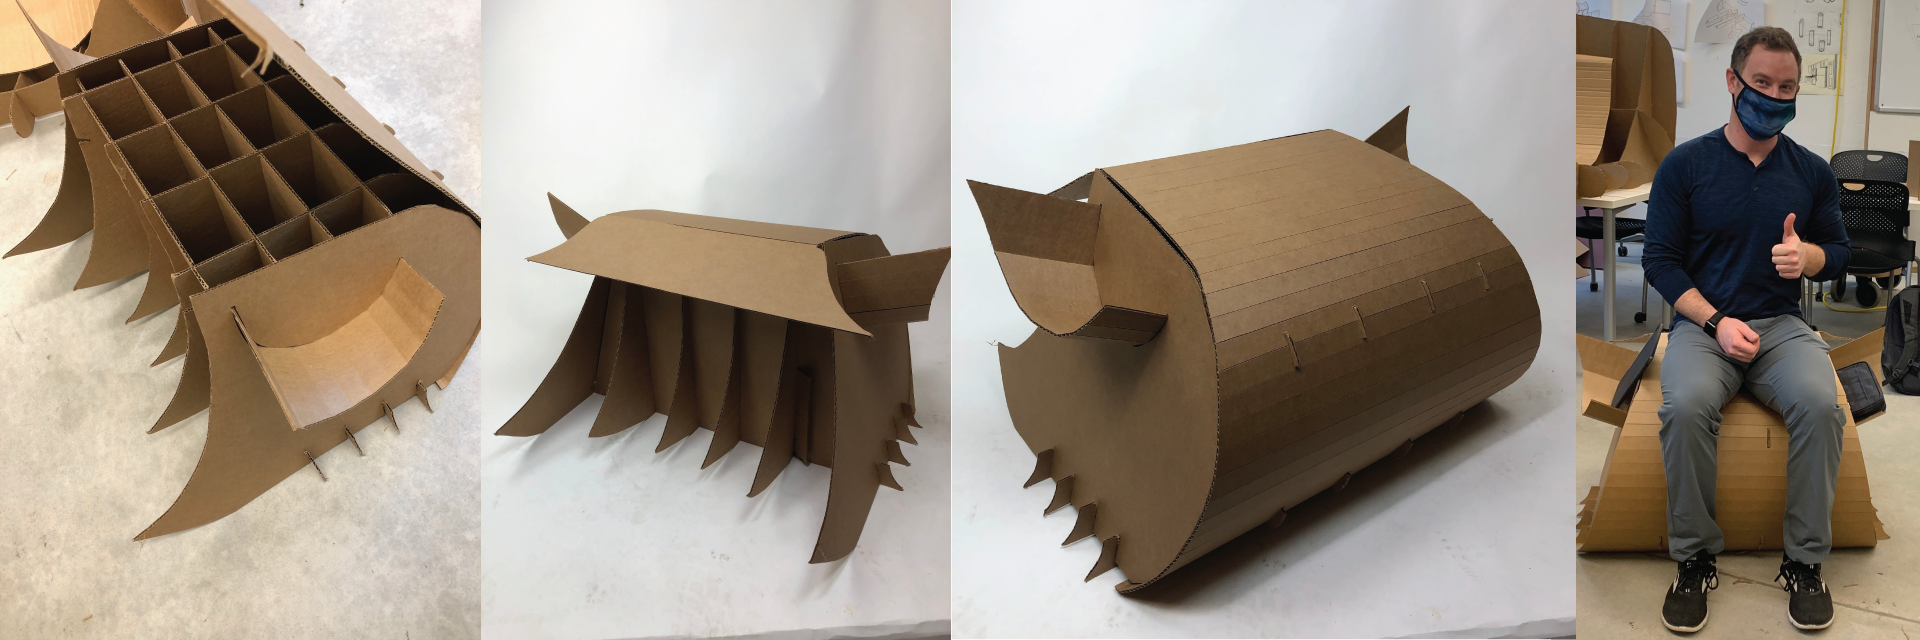 Several photos showing the interworkings of a cardboard stool, as well as a person sitting at it. 